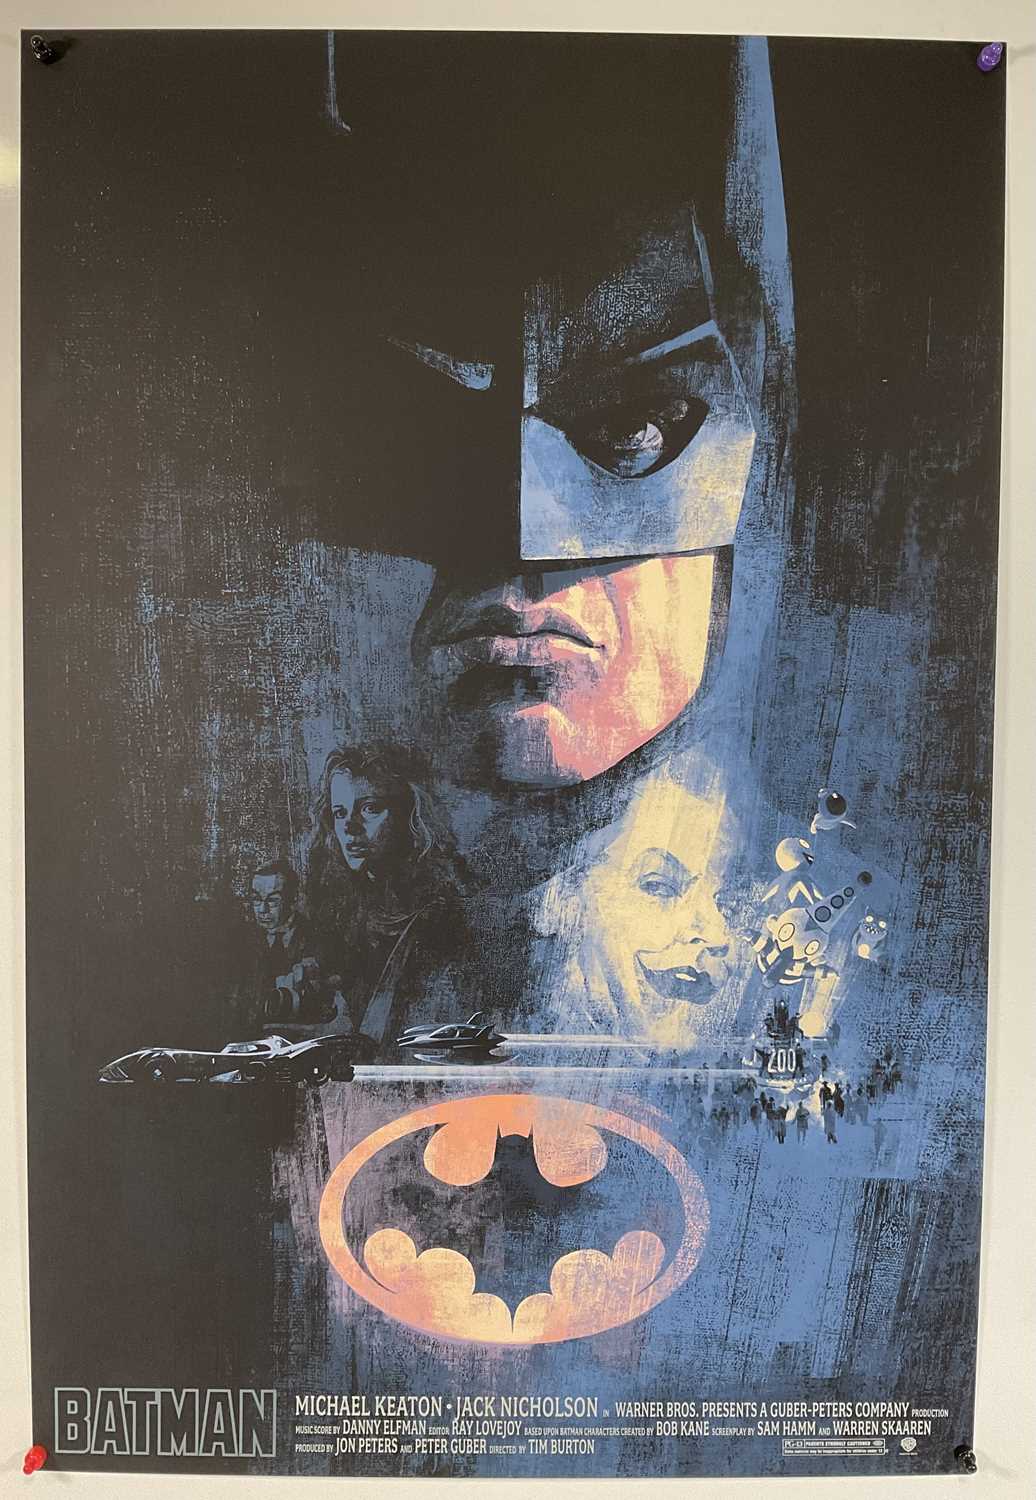 ALTERNATIVE MOVIE POSTERS - BATMAN (1989) by HANS WOODY, 2020, limited edition of only 65 (